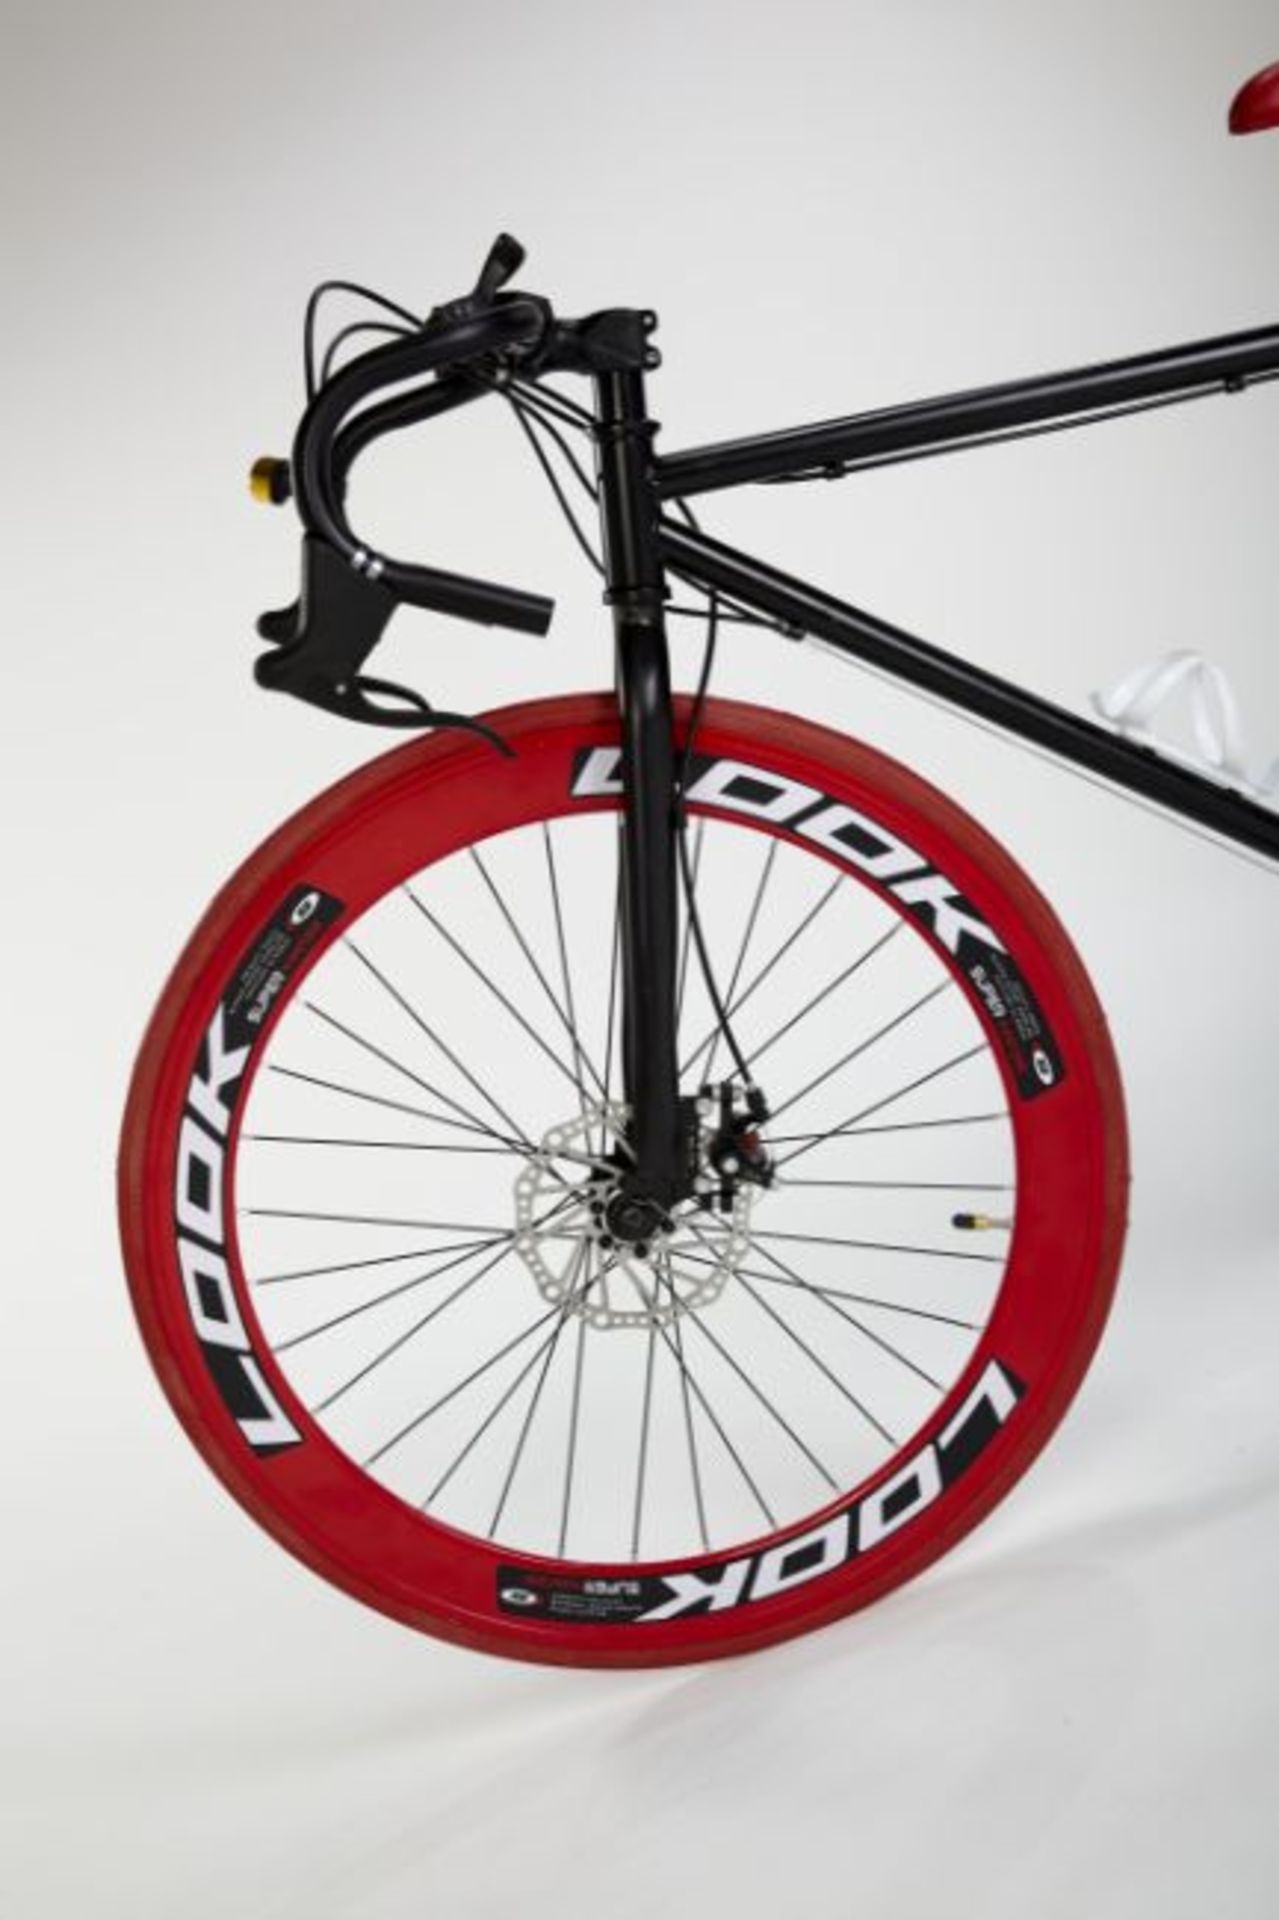 RED/BLACK STREET BIKE WITH 21 GREAR, BRAKE DISKS, KICK STAND, COOL THIN TYRES COMES BOXED - Bild 2 aus 10